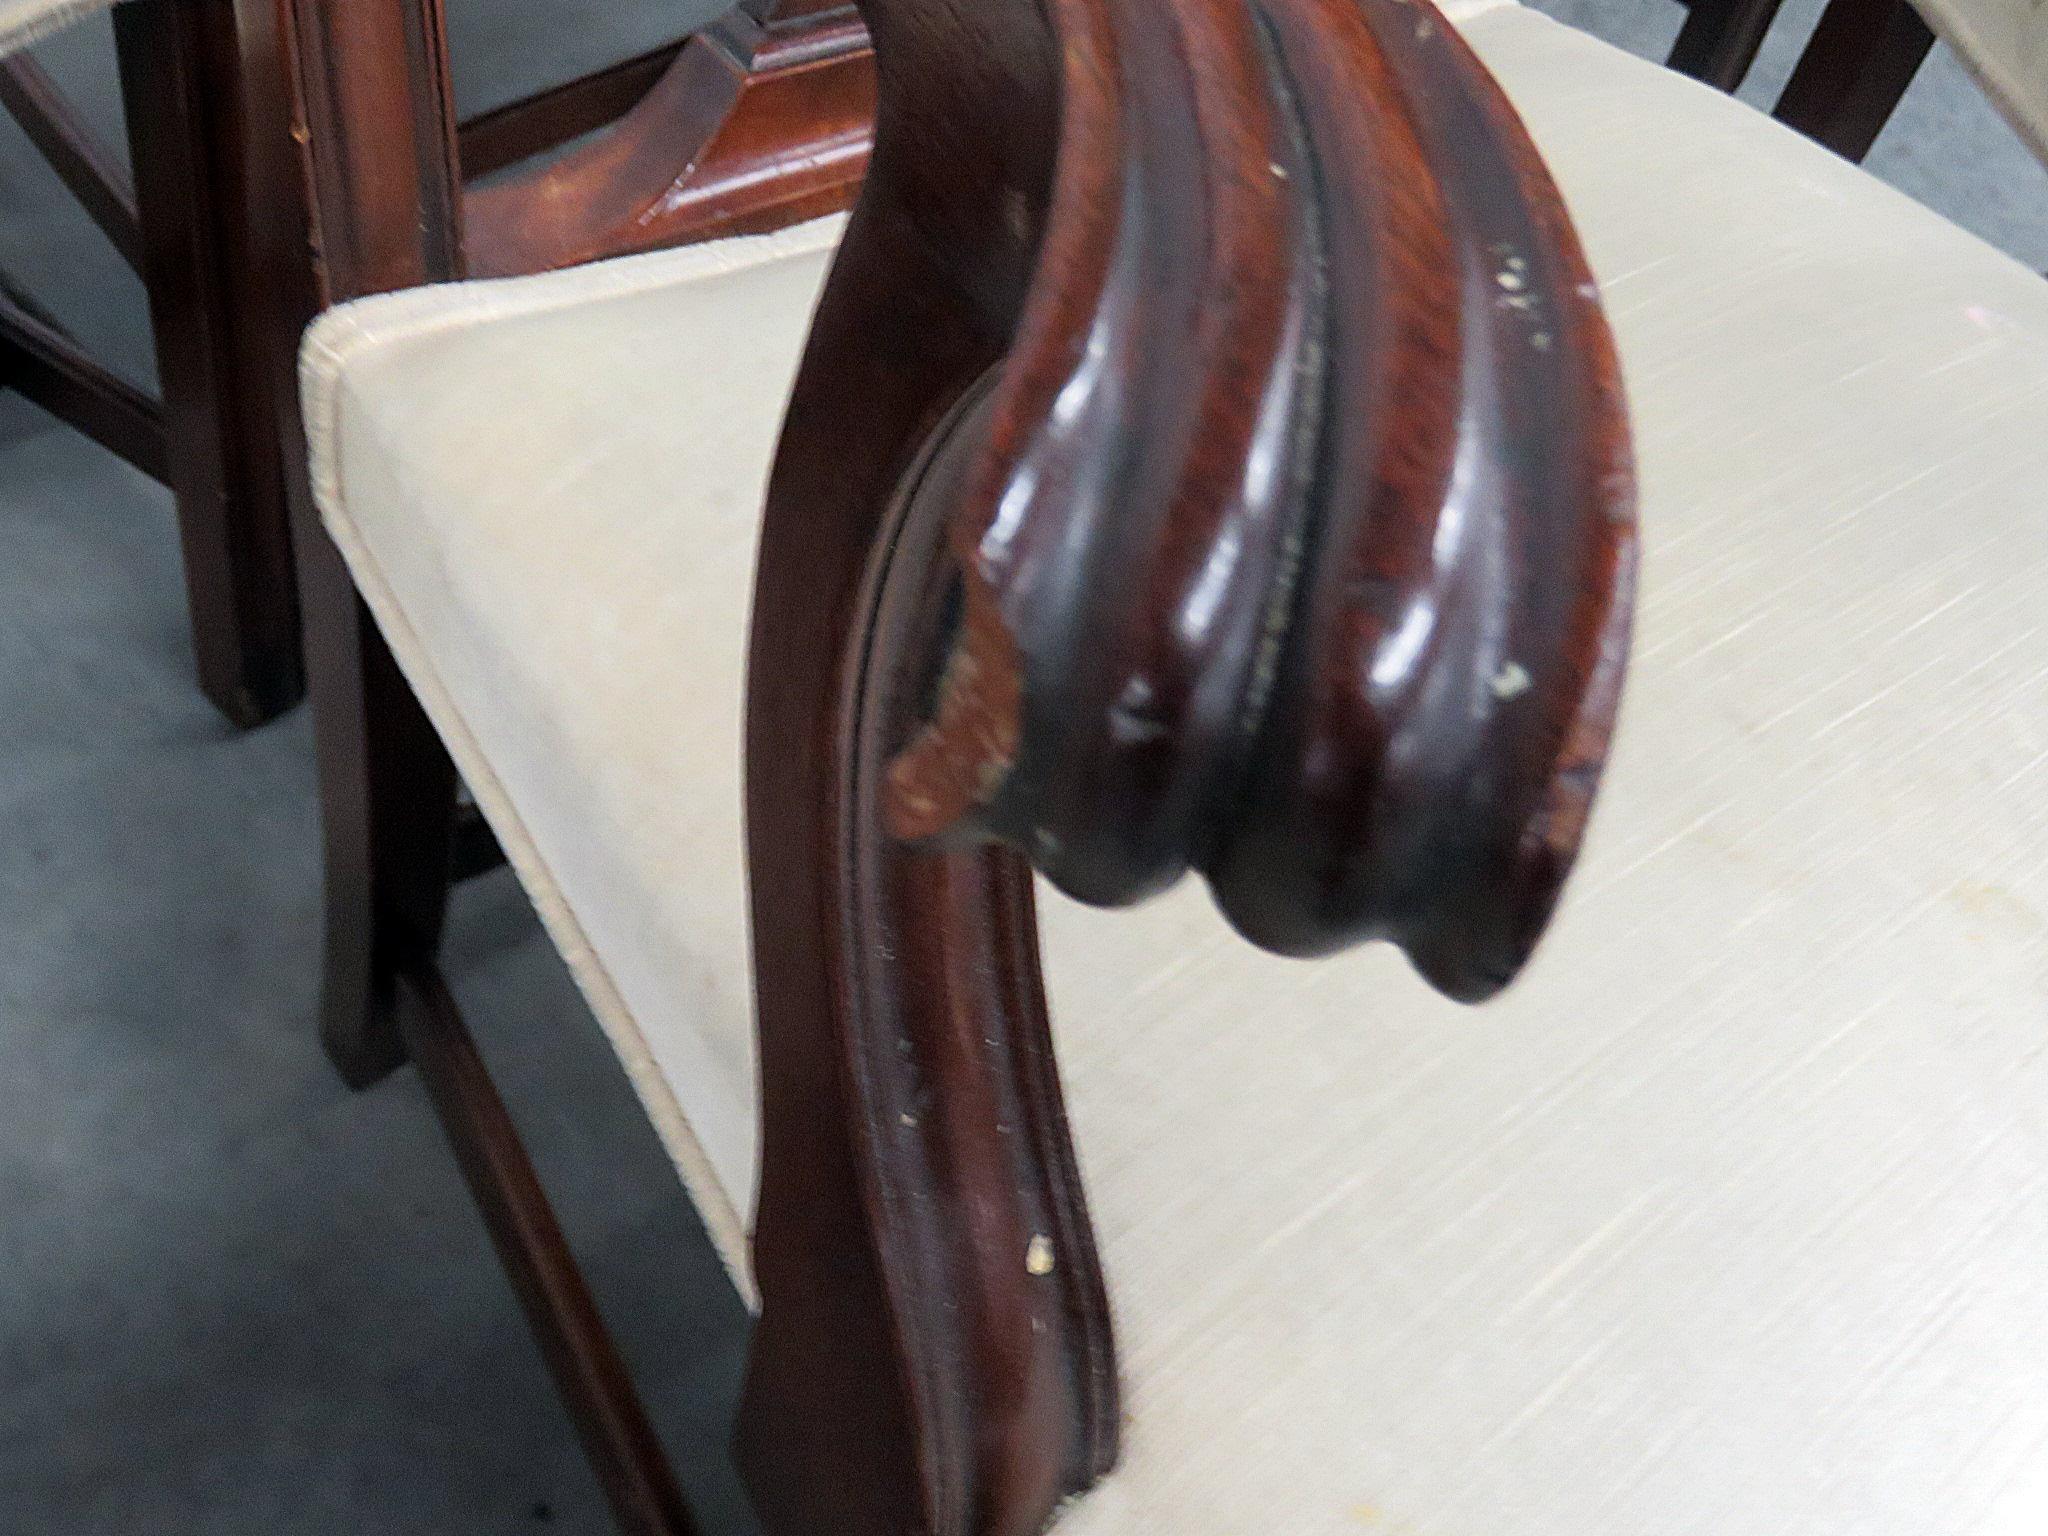 Set of 8 Georgian style mahogany dining room chairs. 2 arm chairs measure 39